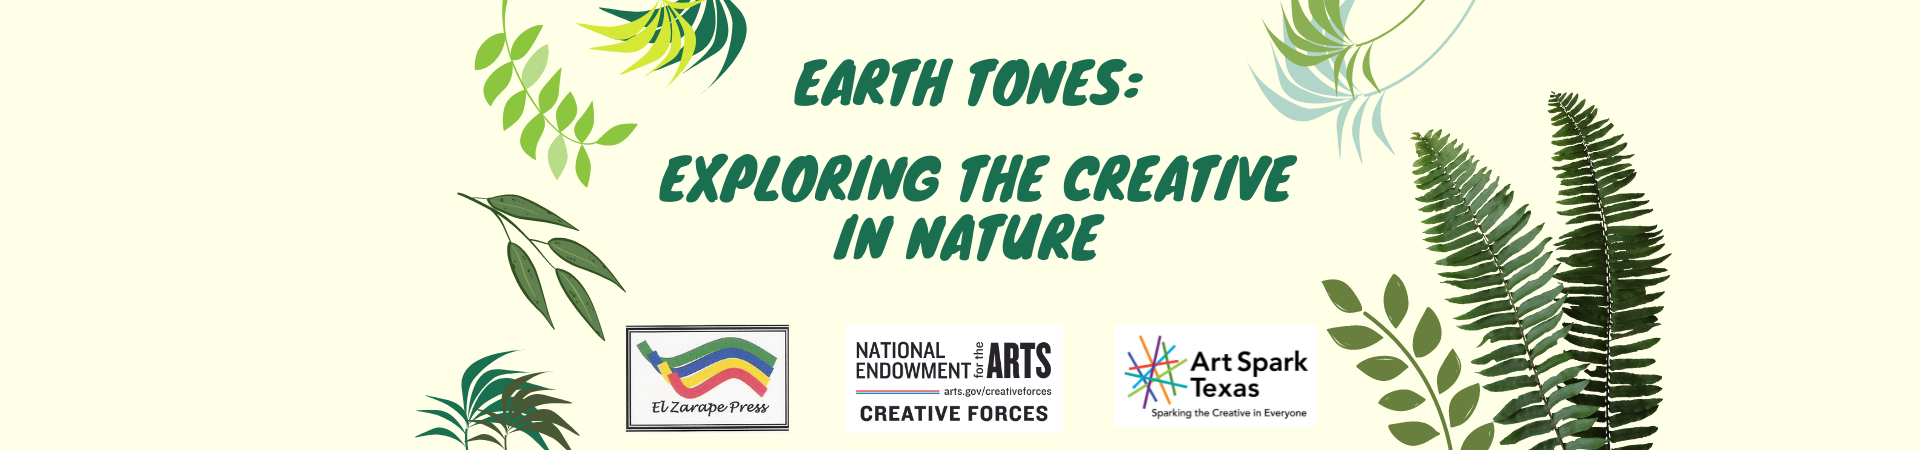 Text surrounded by leaves. Earth Tones: Exploring the Creative in Nature